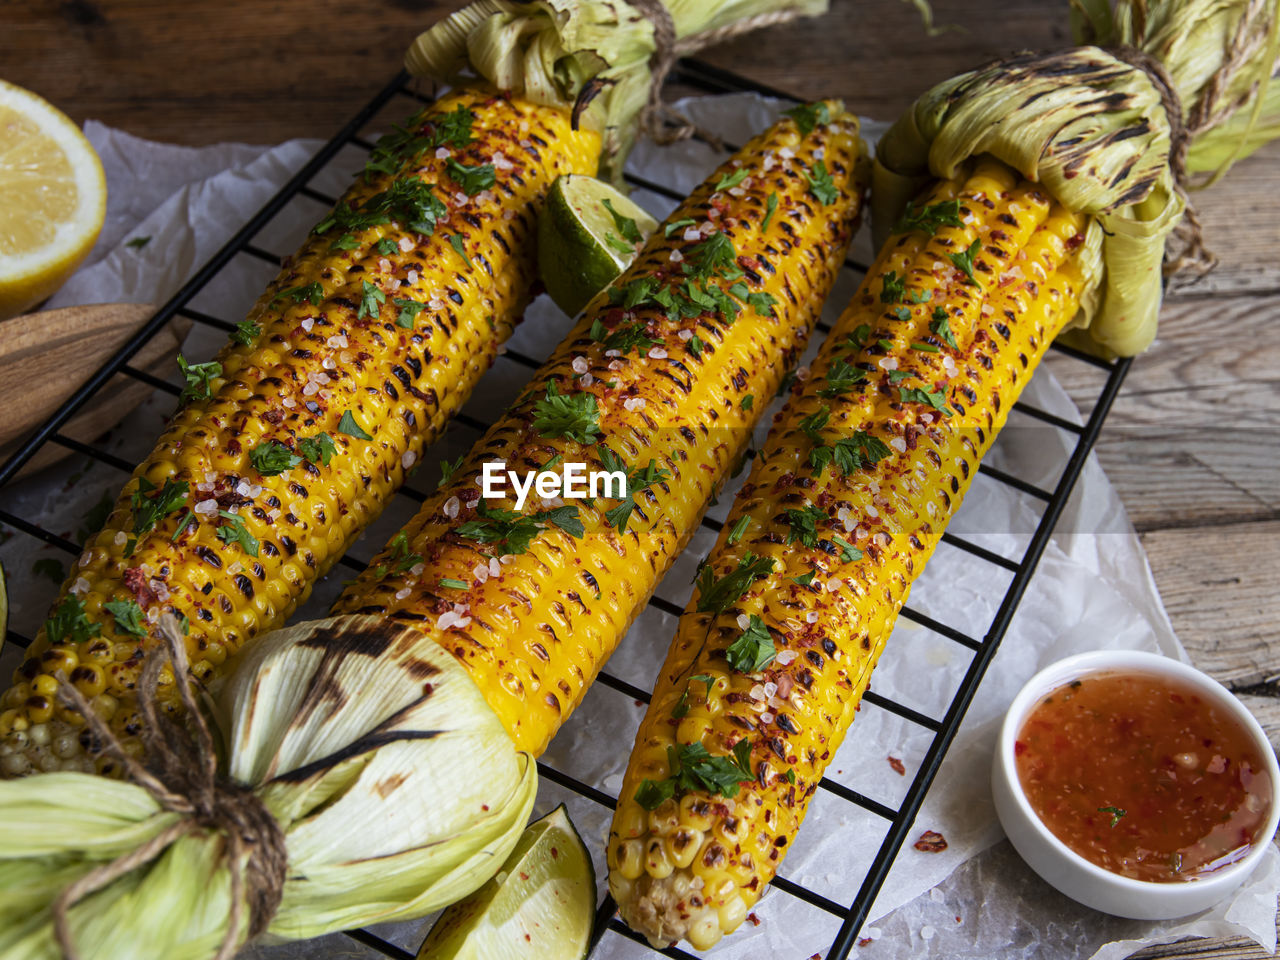 Three heads of yellow corn grilled lemon lime spicy, white orange red sauce, rustic style